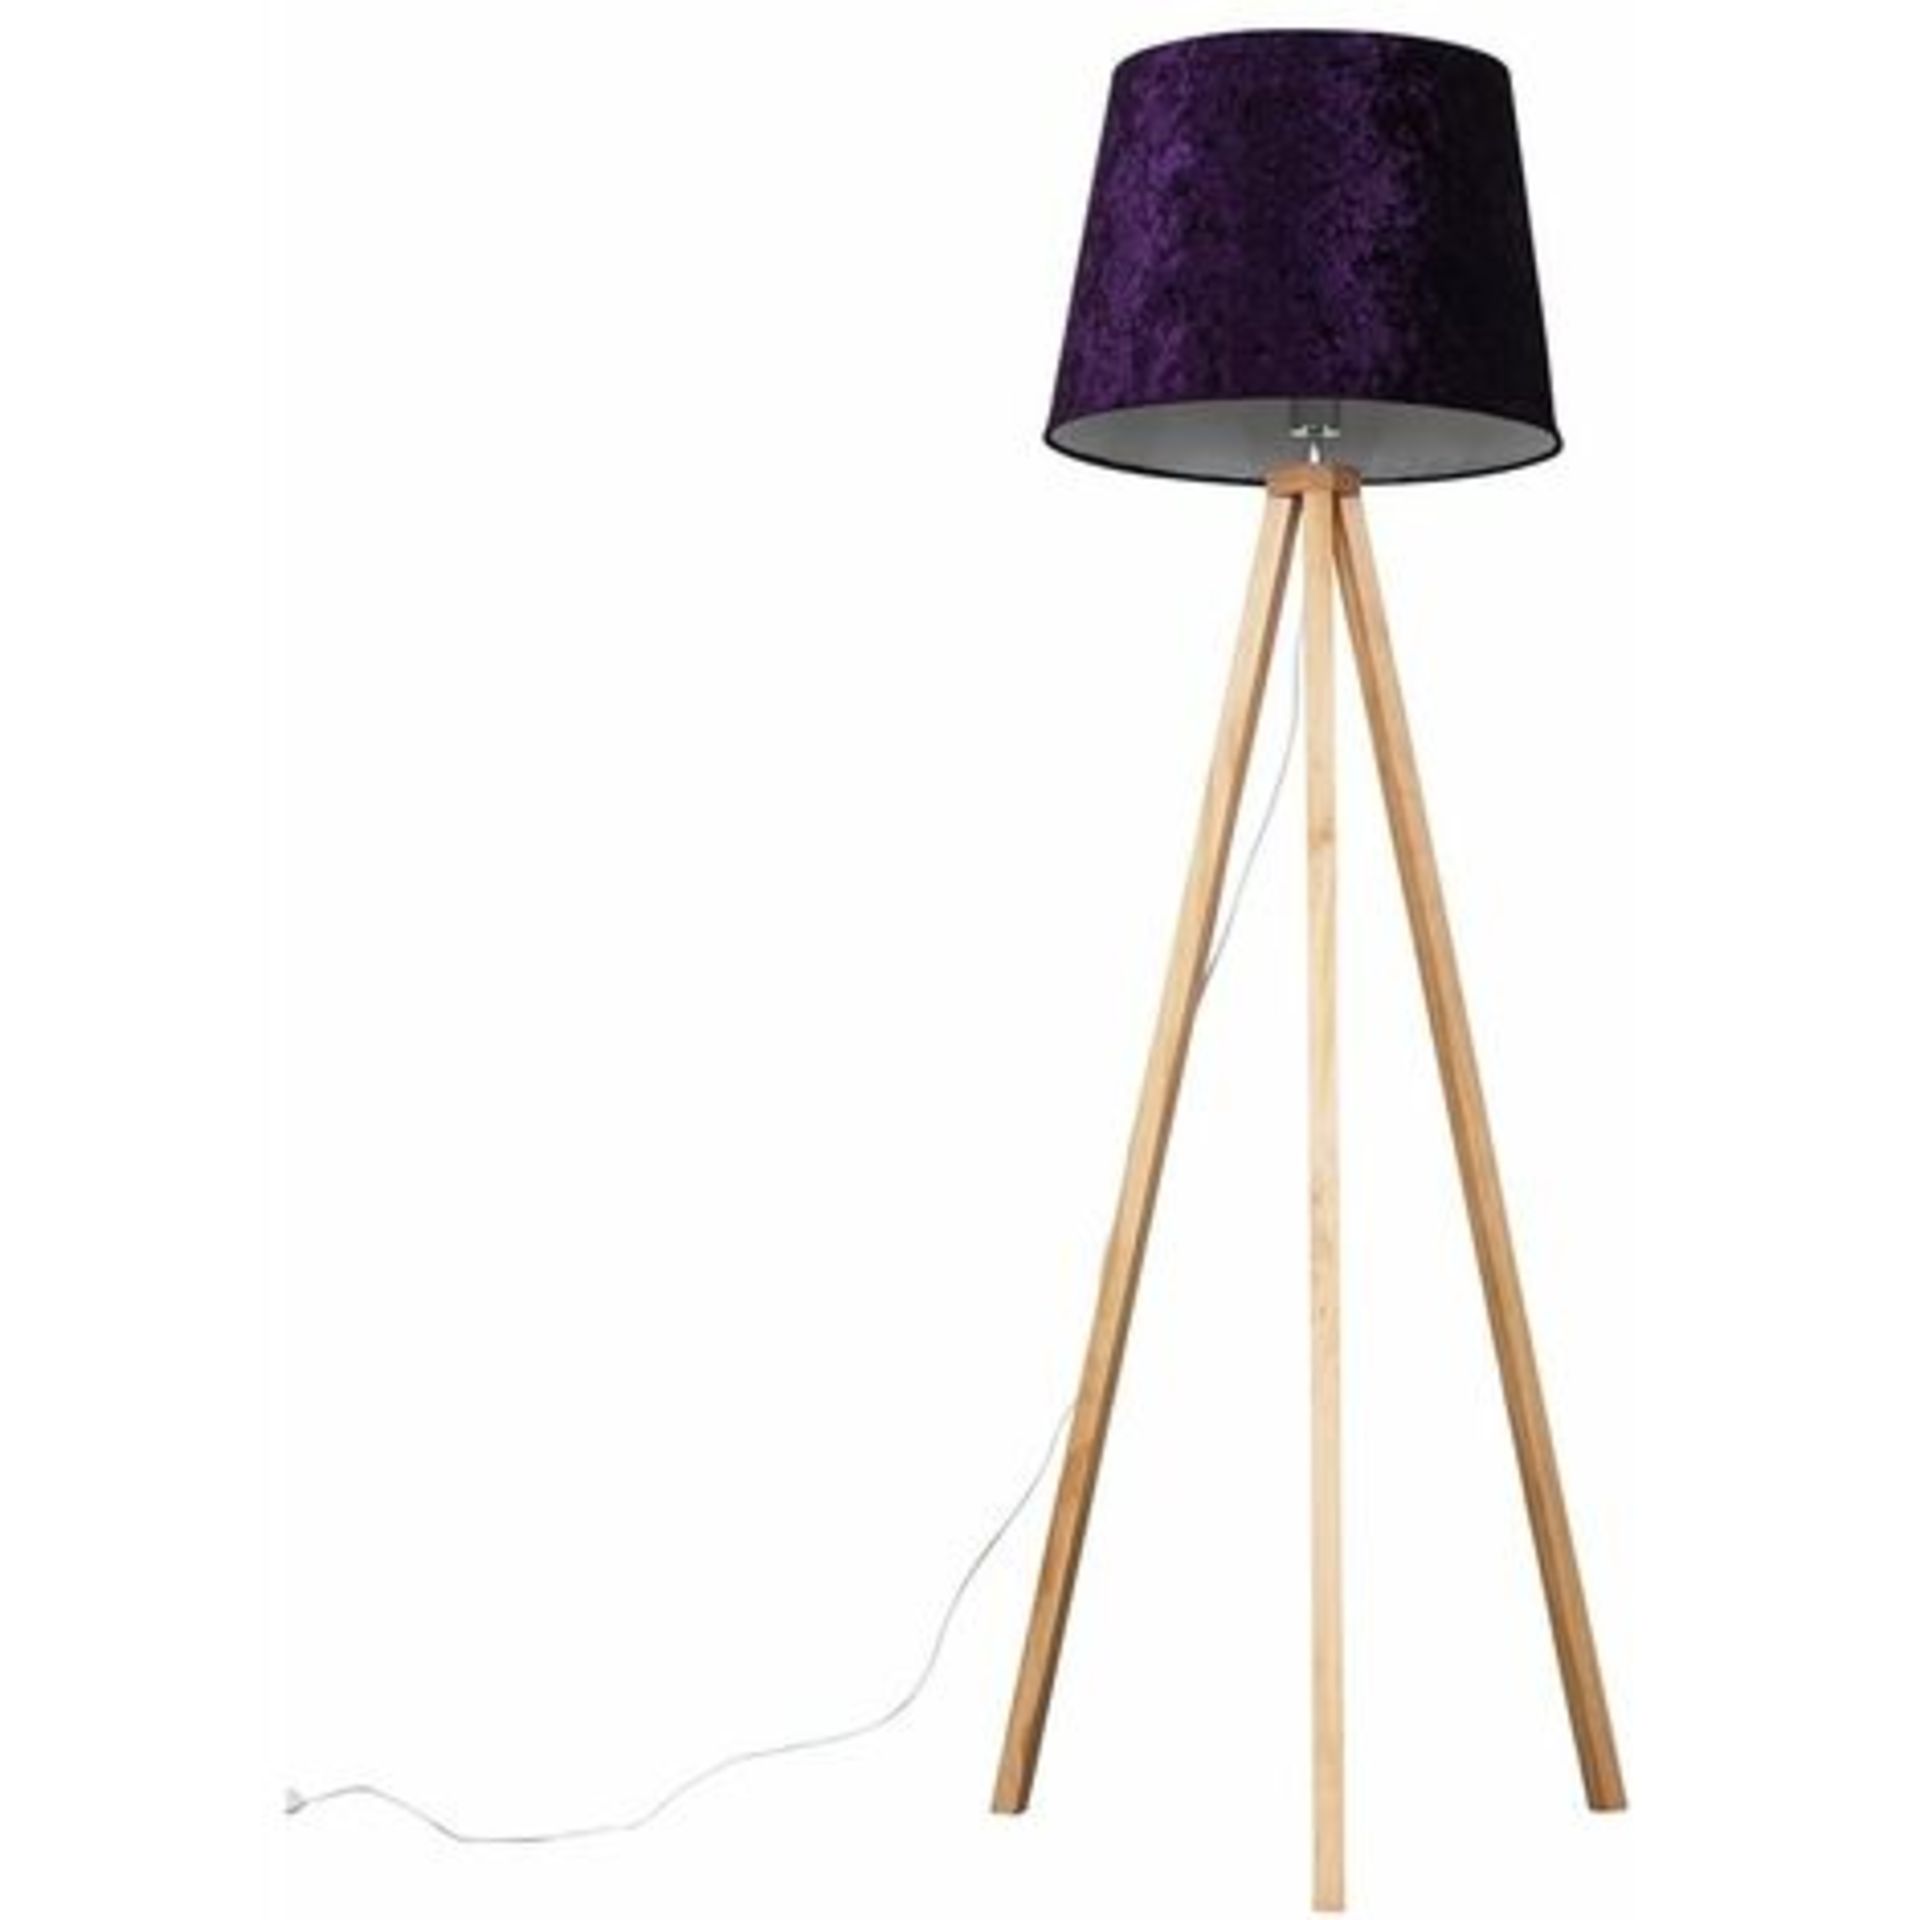 BOXED BARBO PAINTED COPPER WOOD TRIPOD FLOOR LAMP - NO SHADE RRP £58.99 (NO SHADE)Condition